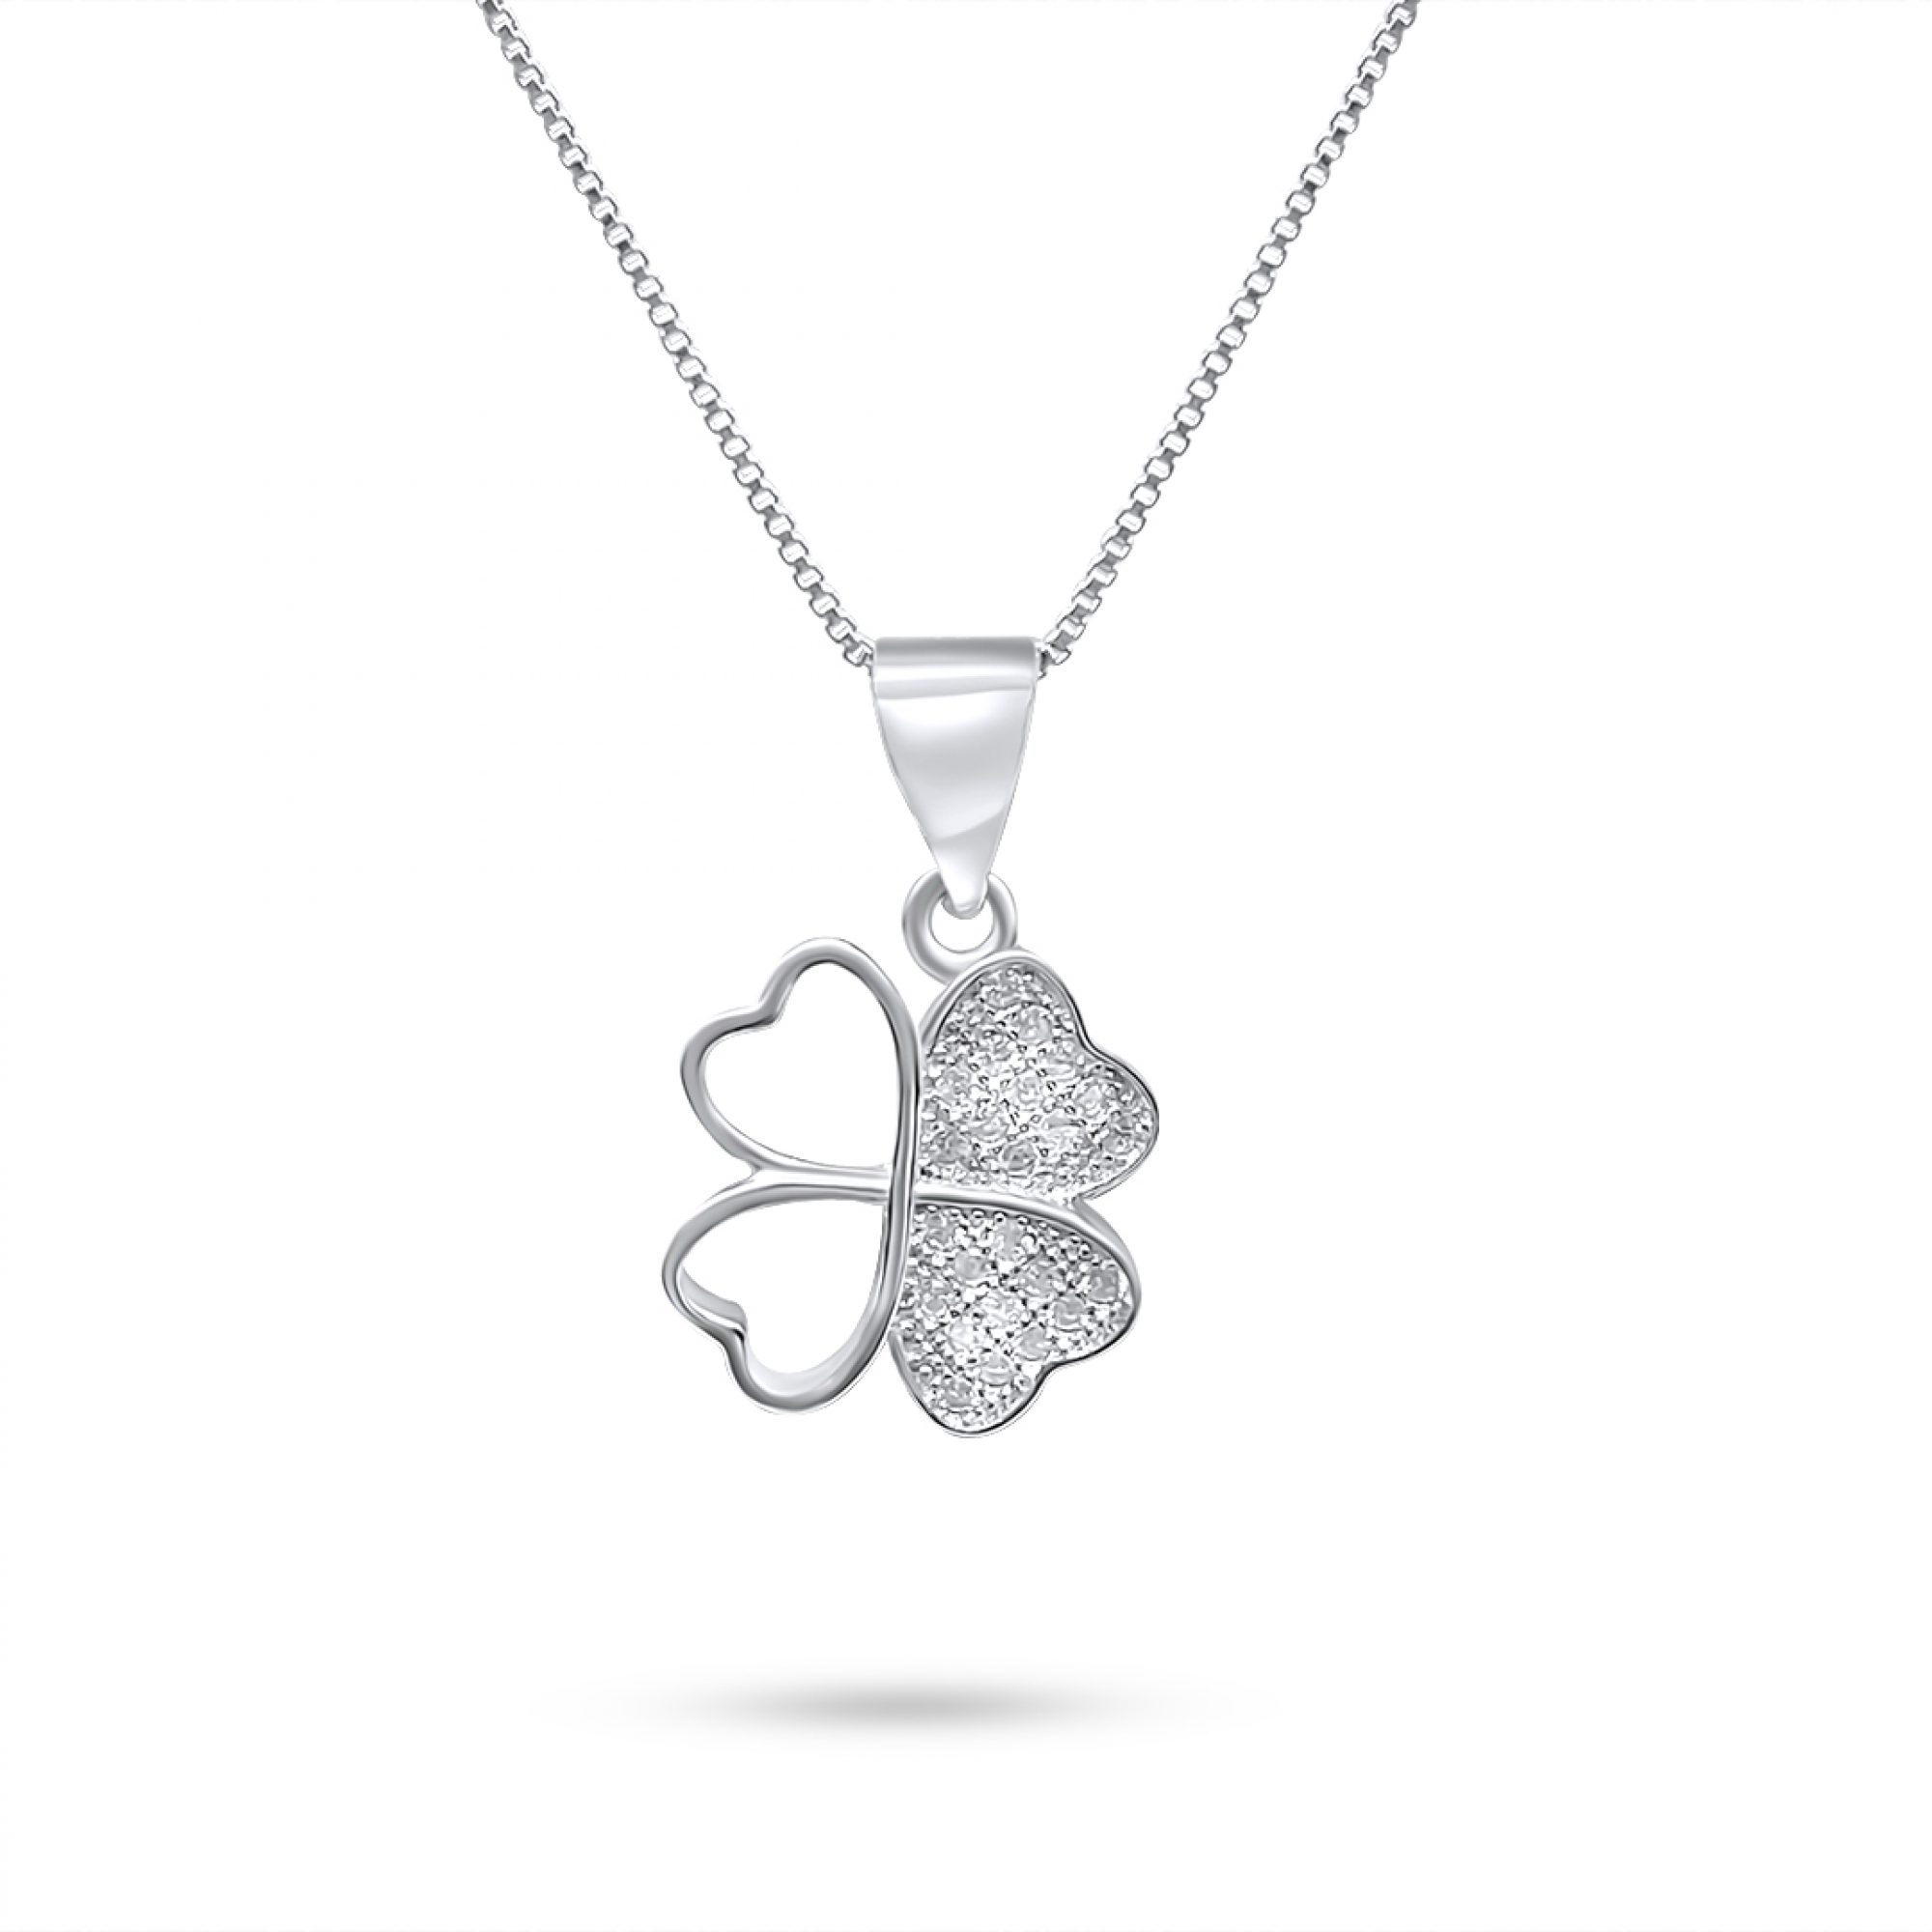 Four leaf clover necklace with zircon stones